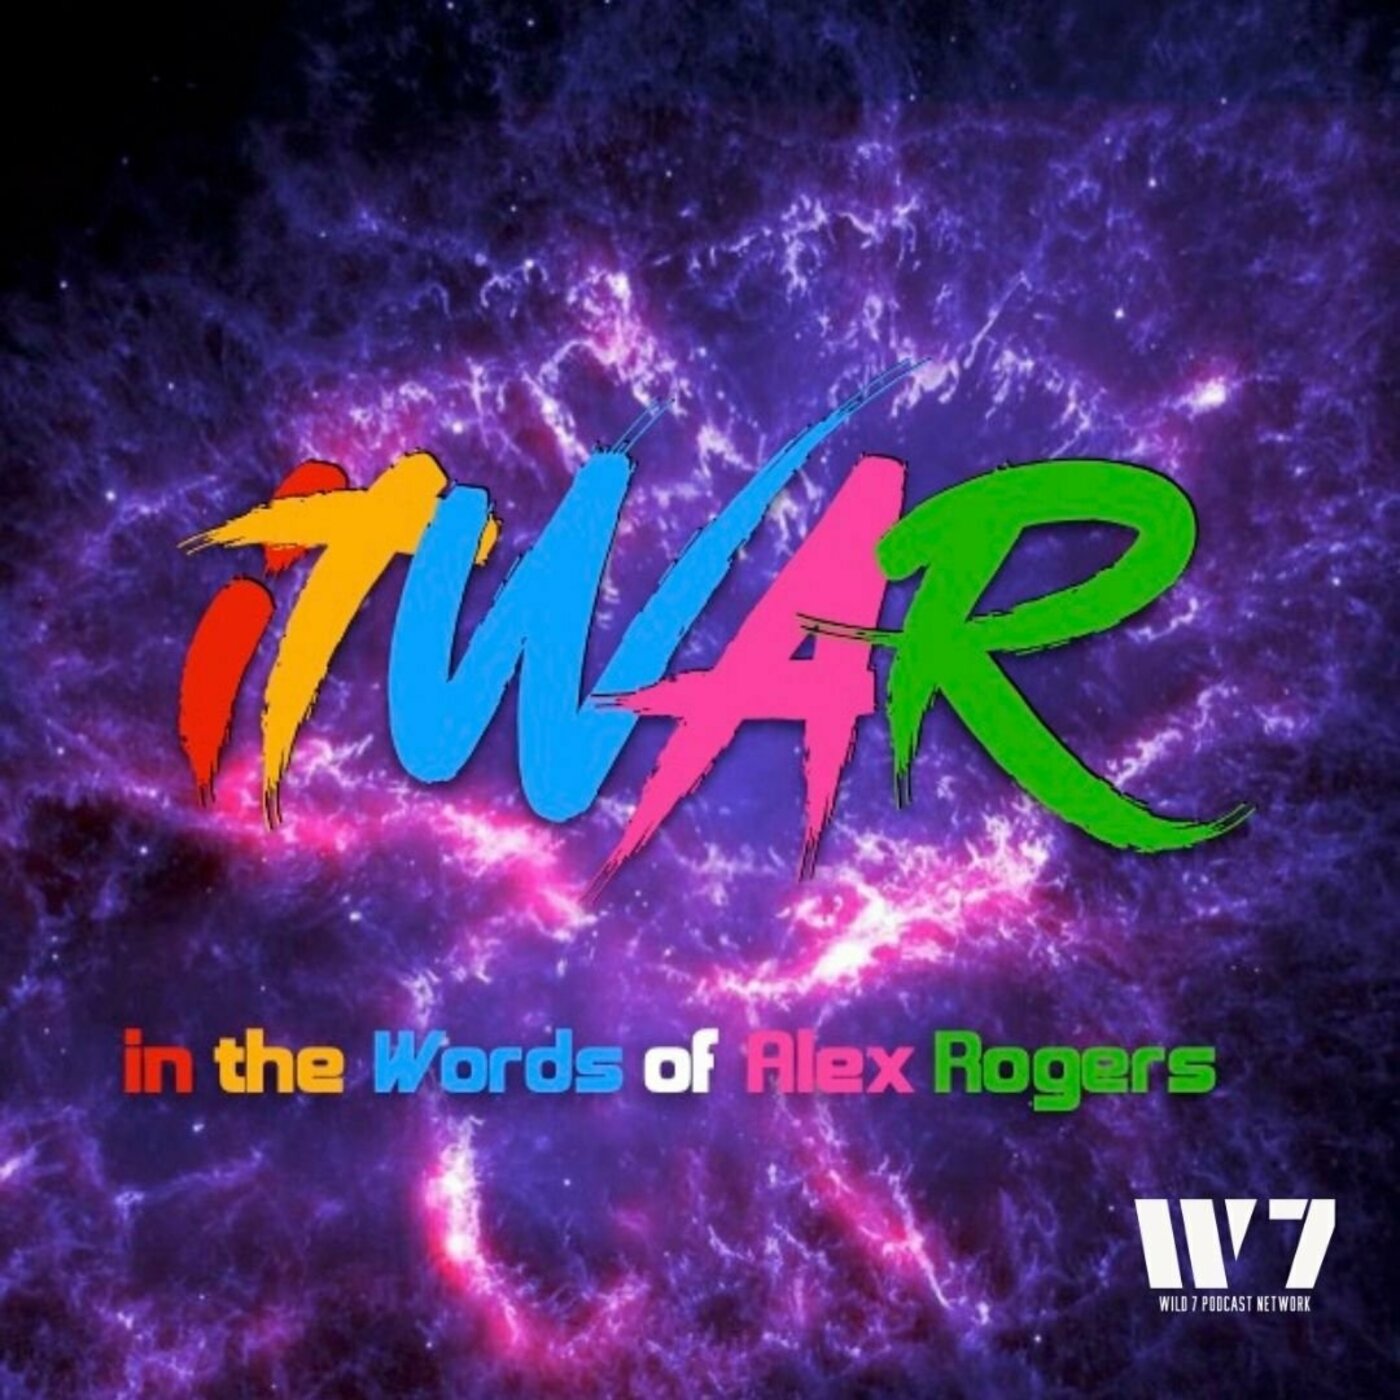 ITWAR - Episode 47: YOU’LL BE DEAD! - In the Words of Alex Rogers